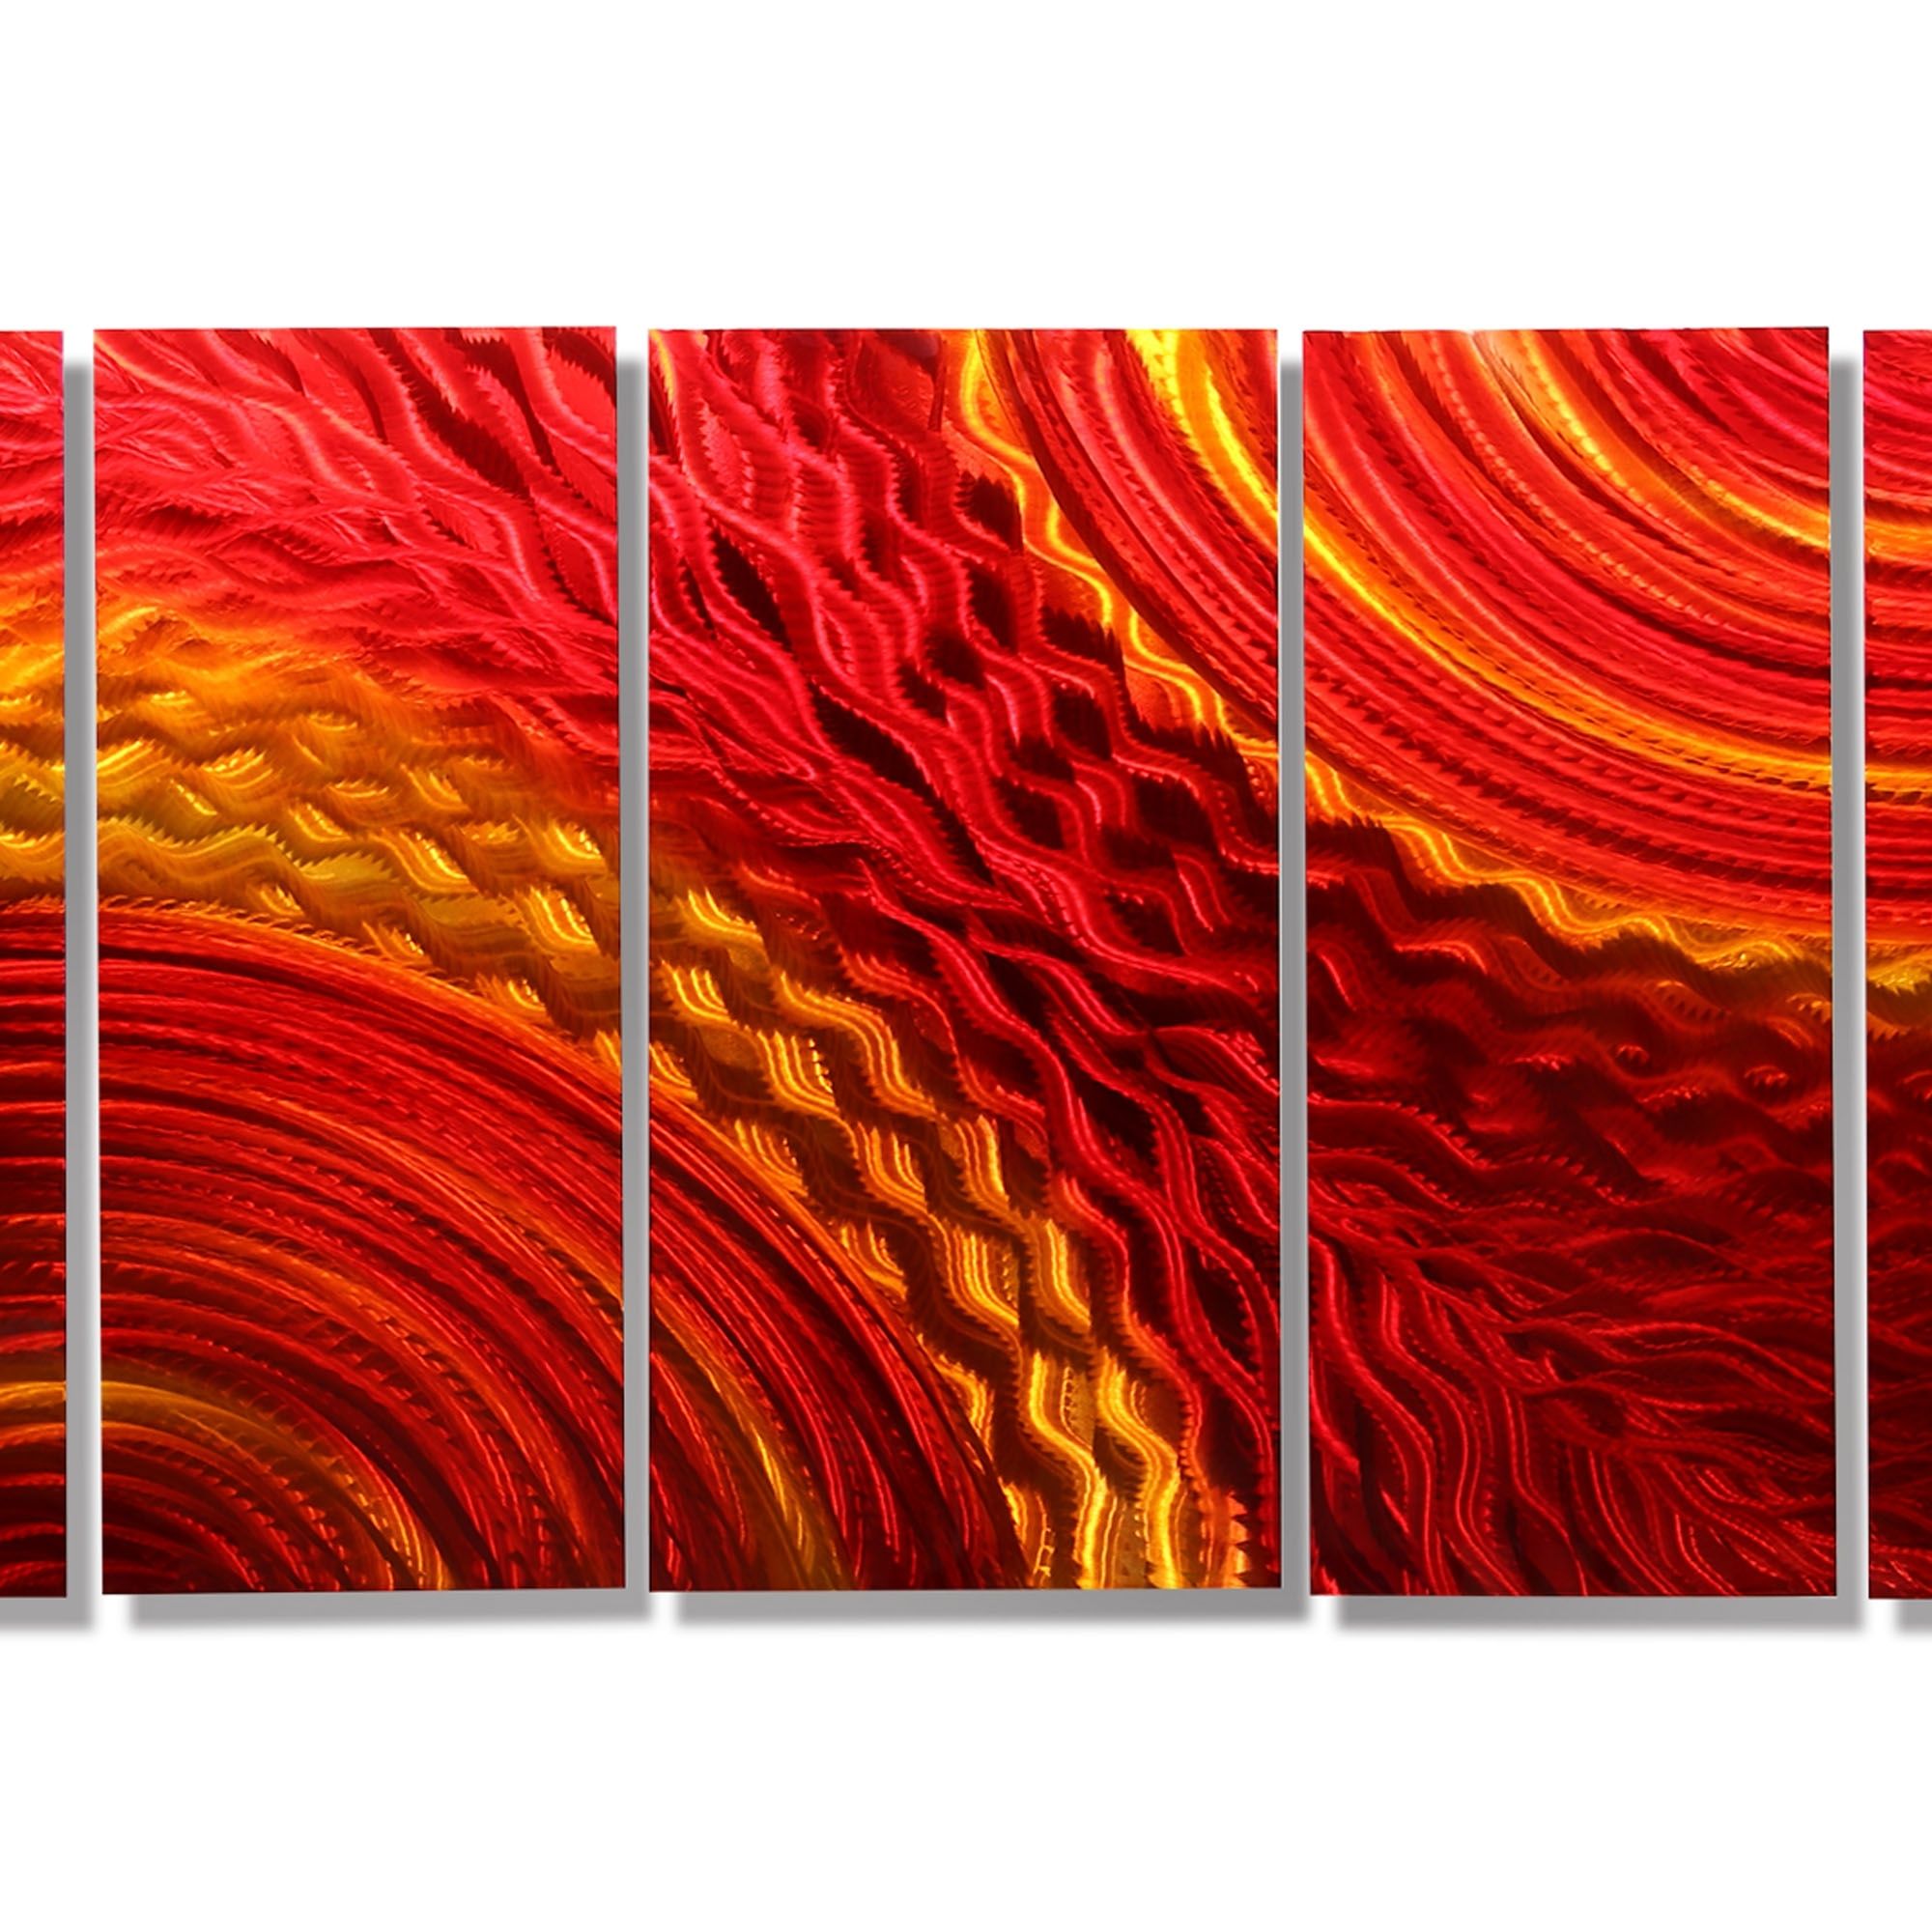 Red Wall Art For Well Known Harvest Moods – Dynamic Red & Gold Modern Metal Wall Sculpture (View 14 of 15)